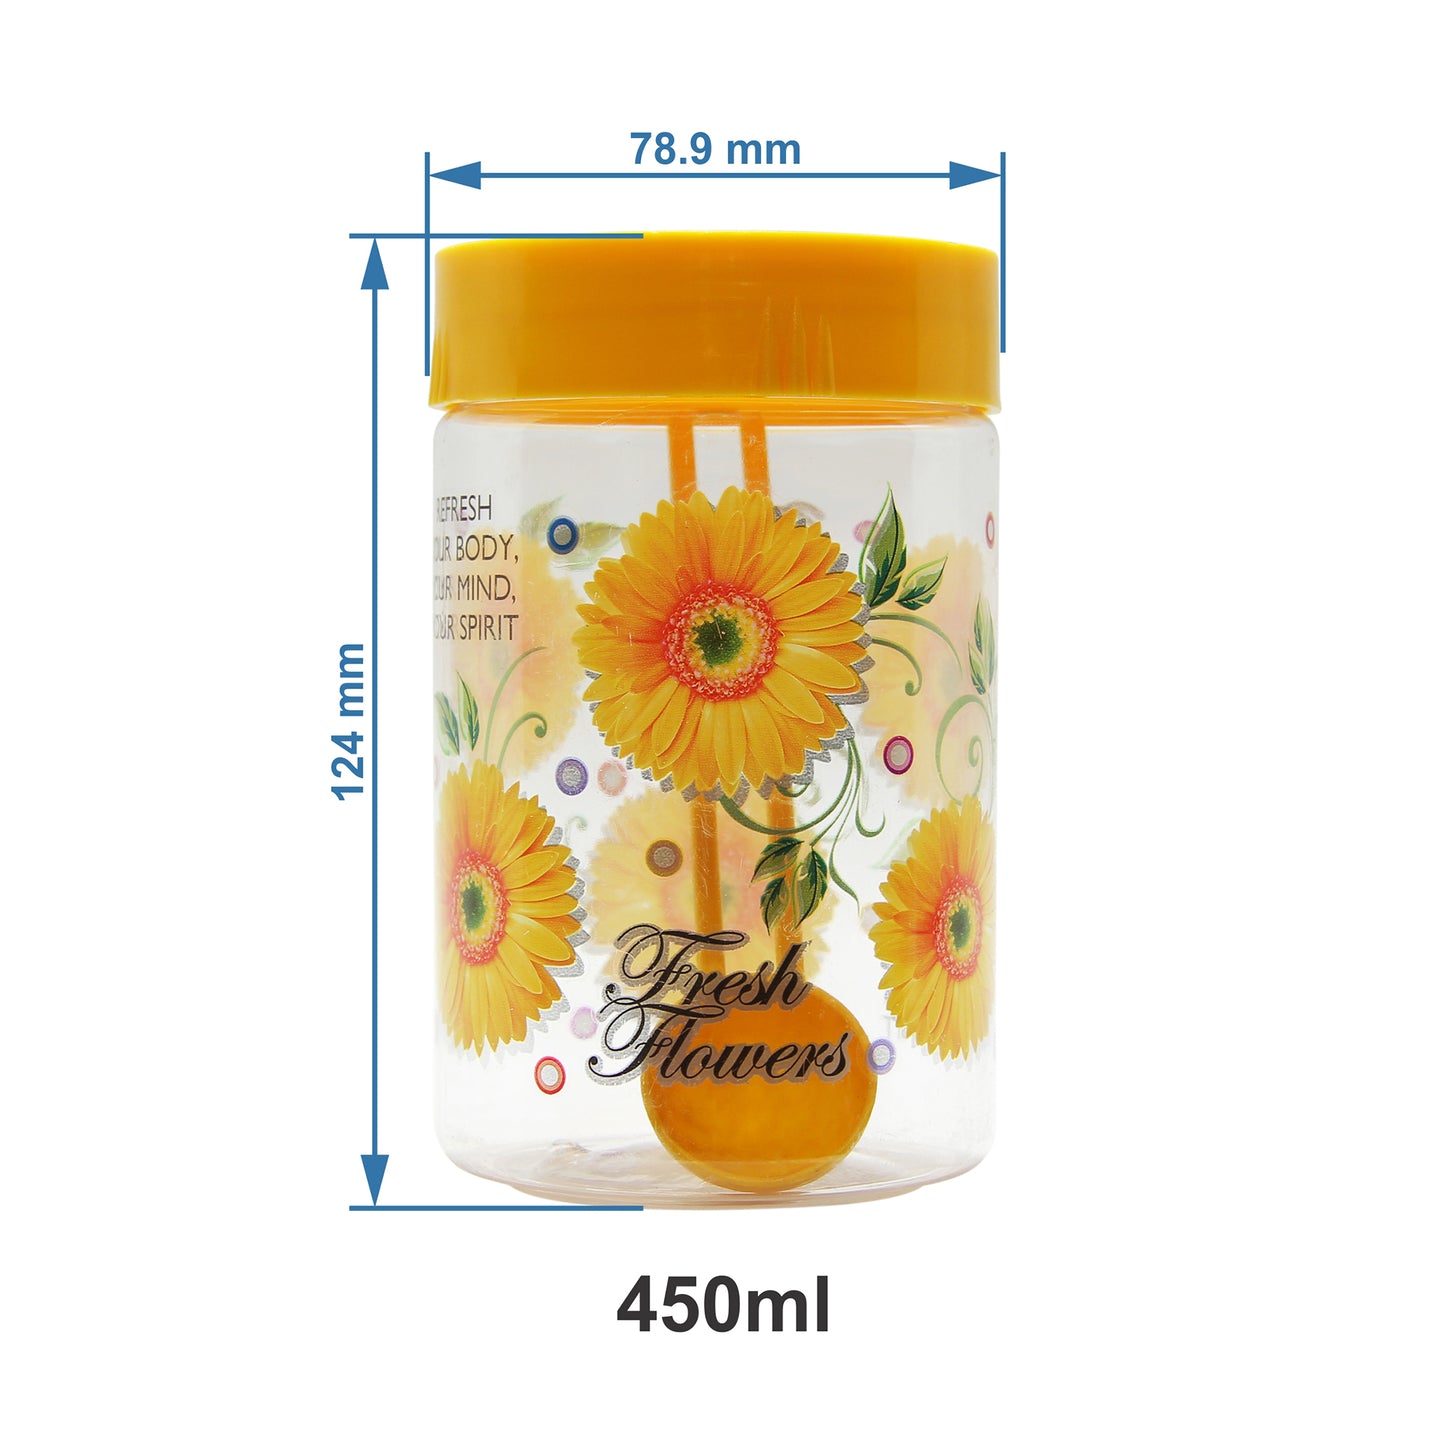 Print Magic Container - Pack of 13 -  450 ml, 250 ml, 150 ml, 50 ml Plastic Grocery Container, Yellow